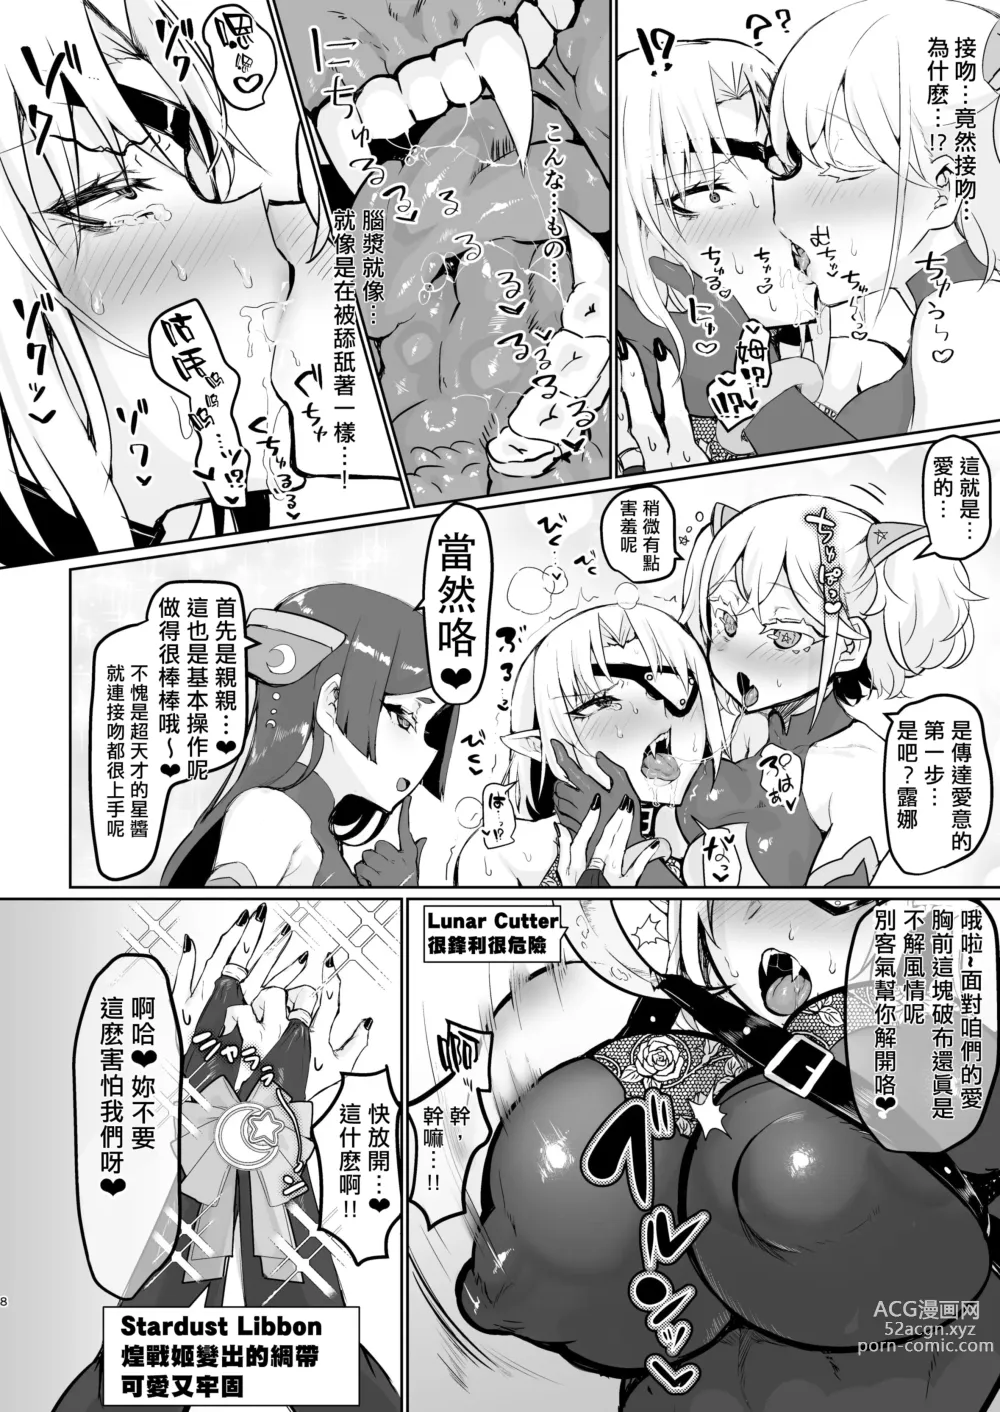 Page 8 of doujinshi 邪恶组织女干部正堕